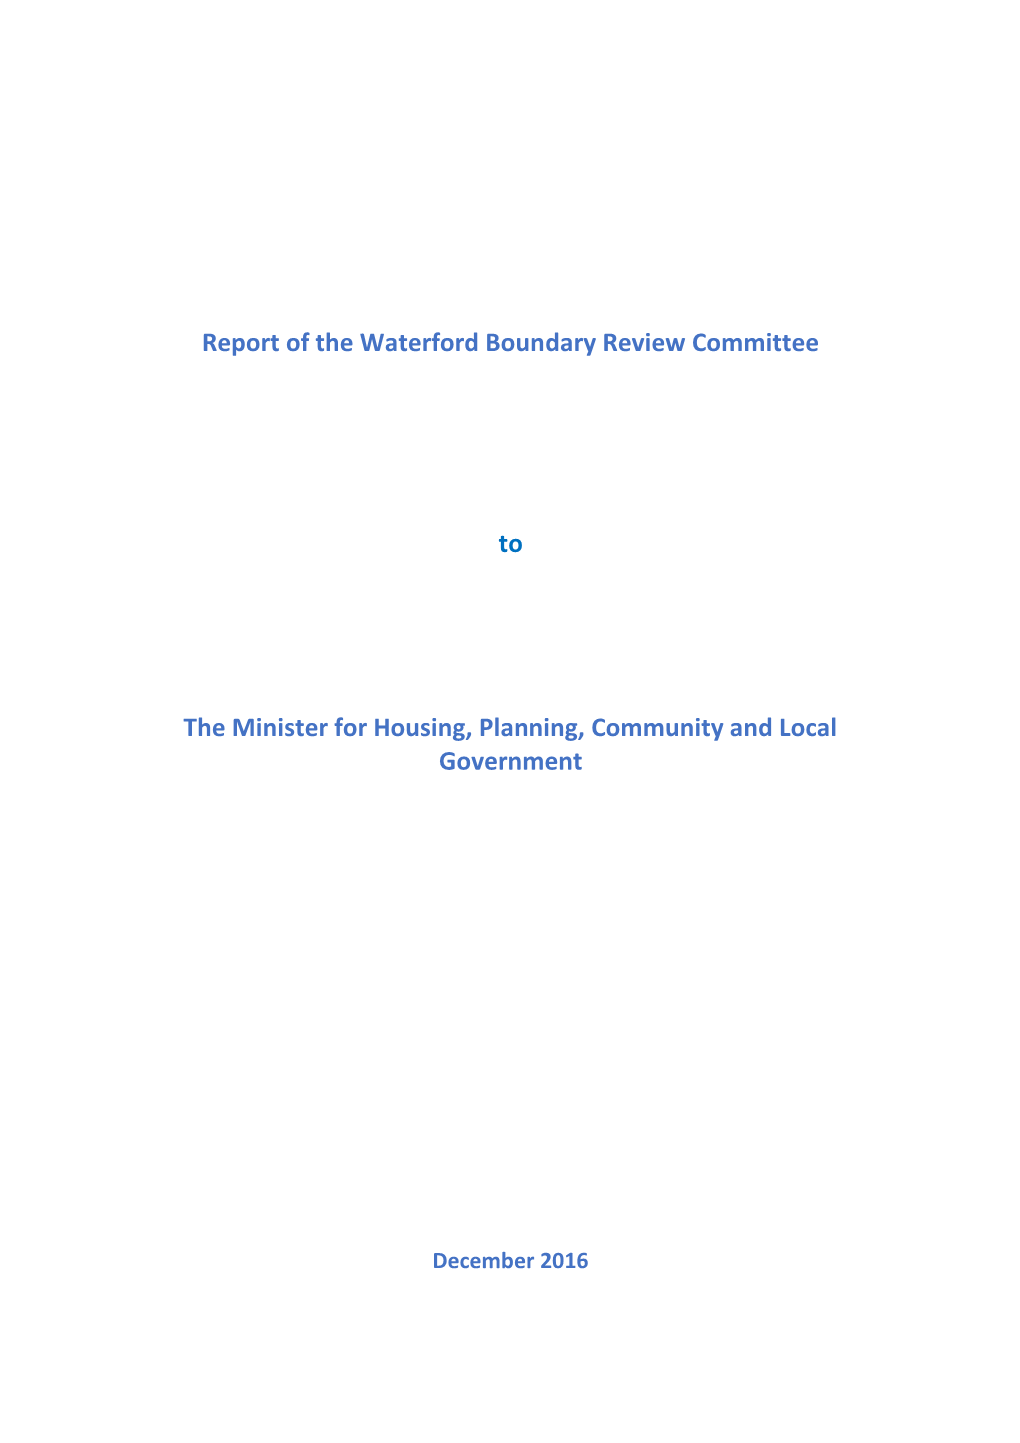 Report of the Waterford Boundary Review Committee to the Minister for Housing, Planning, Community and Local Government